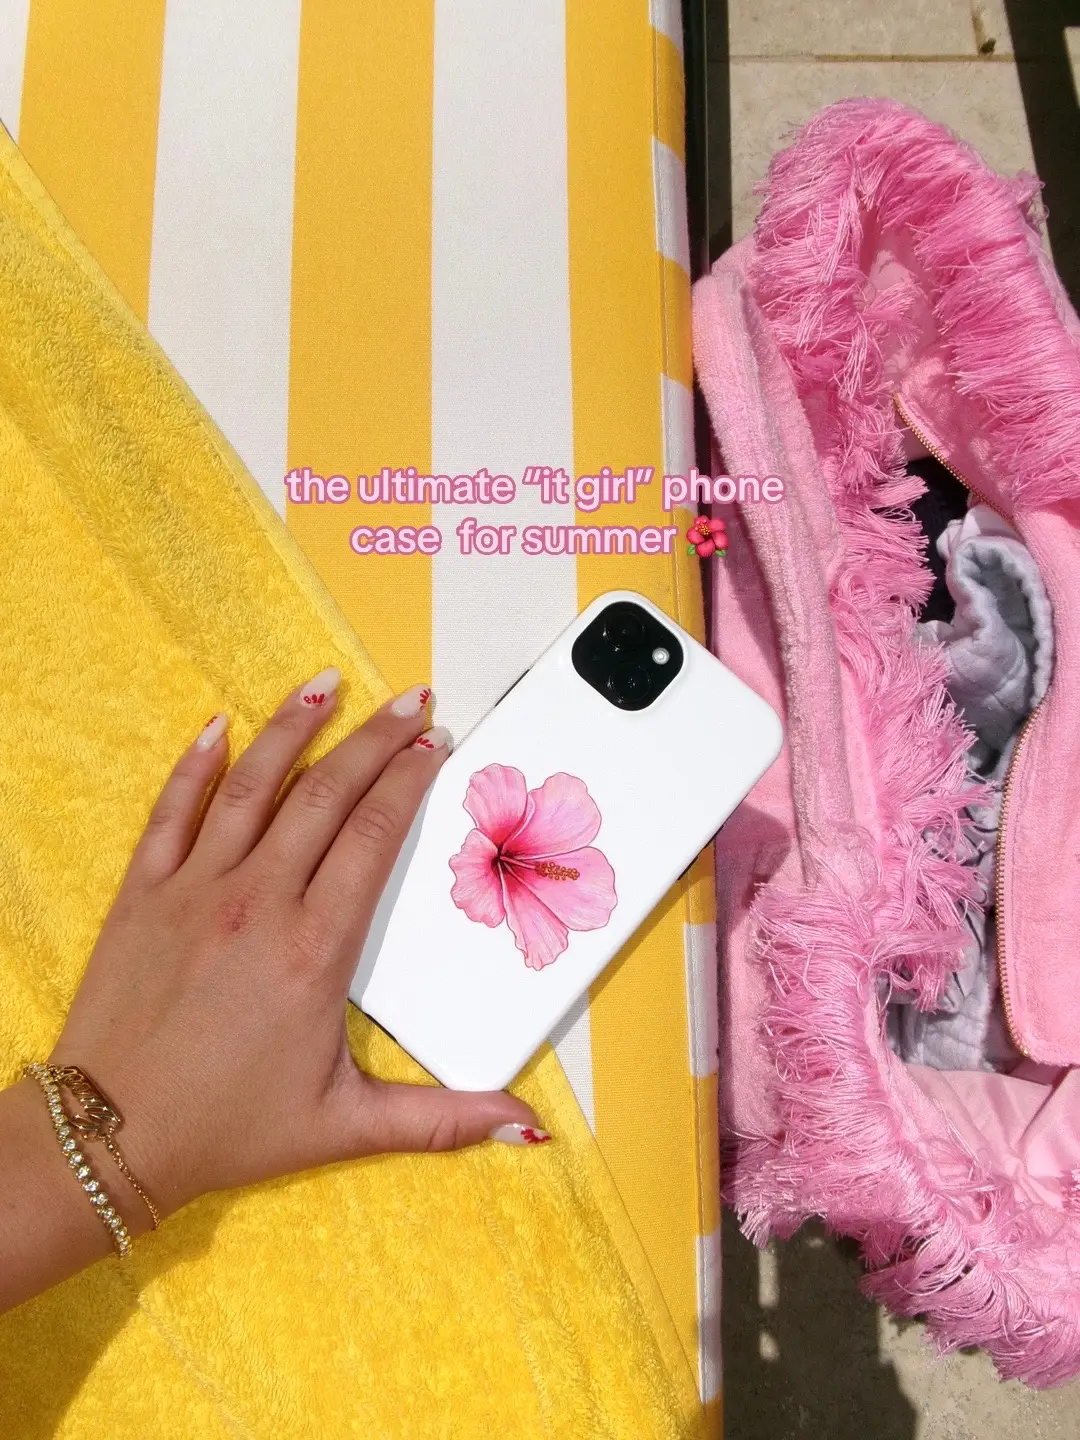 im obsesssssed <3 under “PHONE CASES” in my amazon SF! #amazonphonecases #coolgirlphonecase #cutephonecases #protectivephonecase #itgirlphonecase #amazonaccessories #summeraccessories #cuteprotectivephonecases 